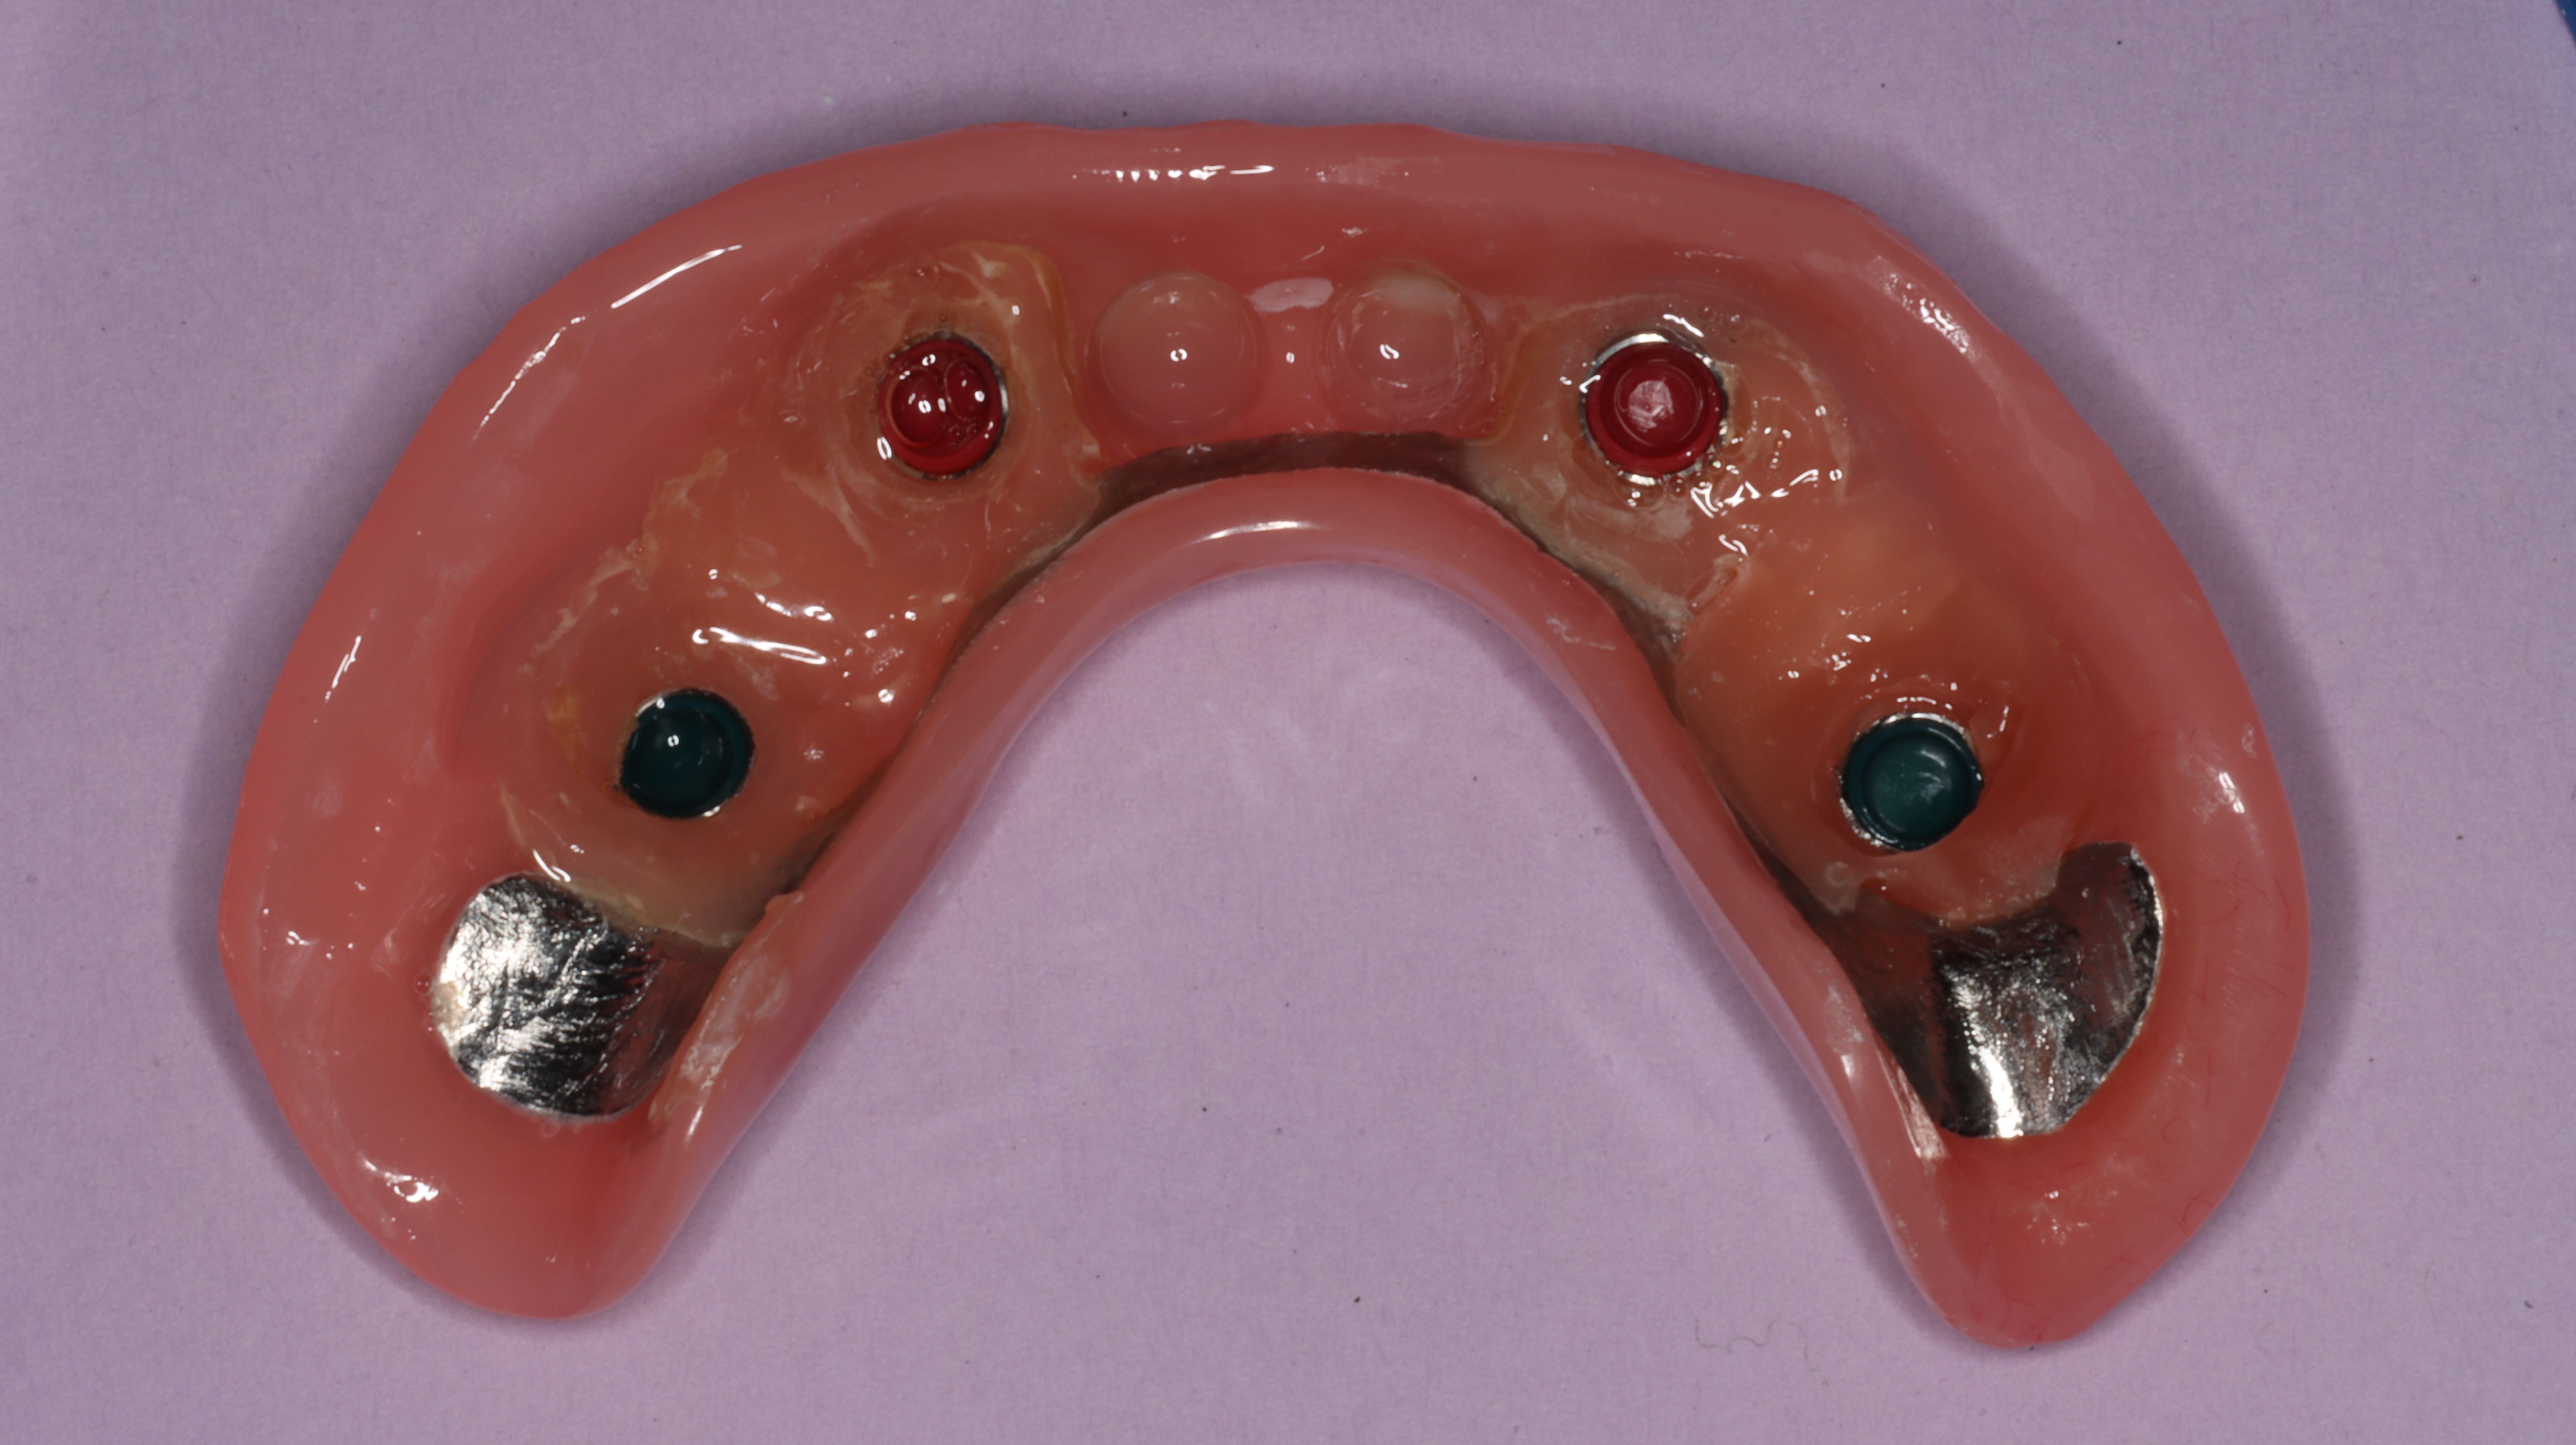 Figure 22. Intaglio view of overdenture following intra-oral cold cure pickup of locator attachments immediately following surgery.